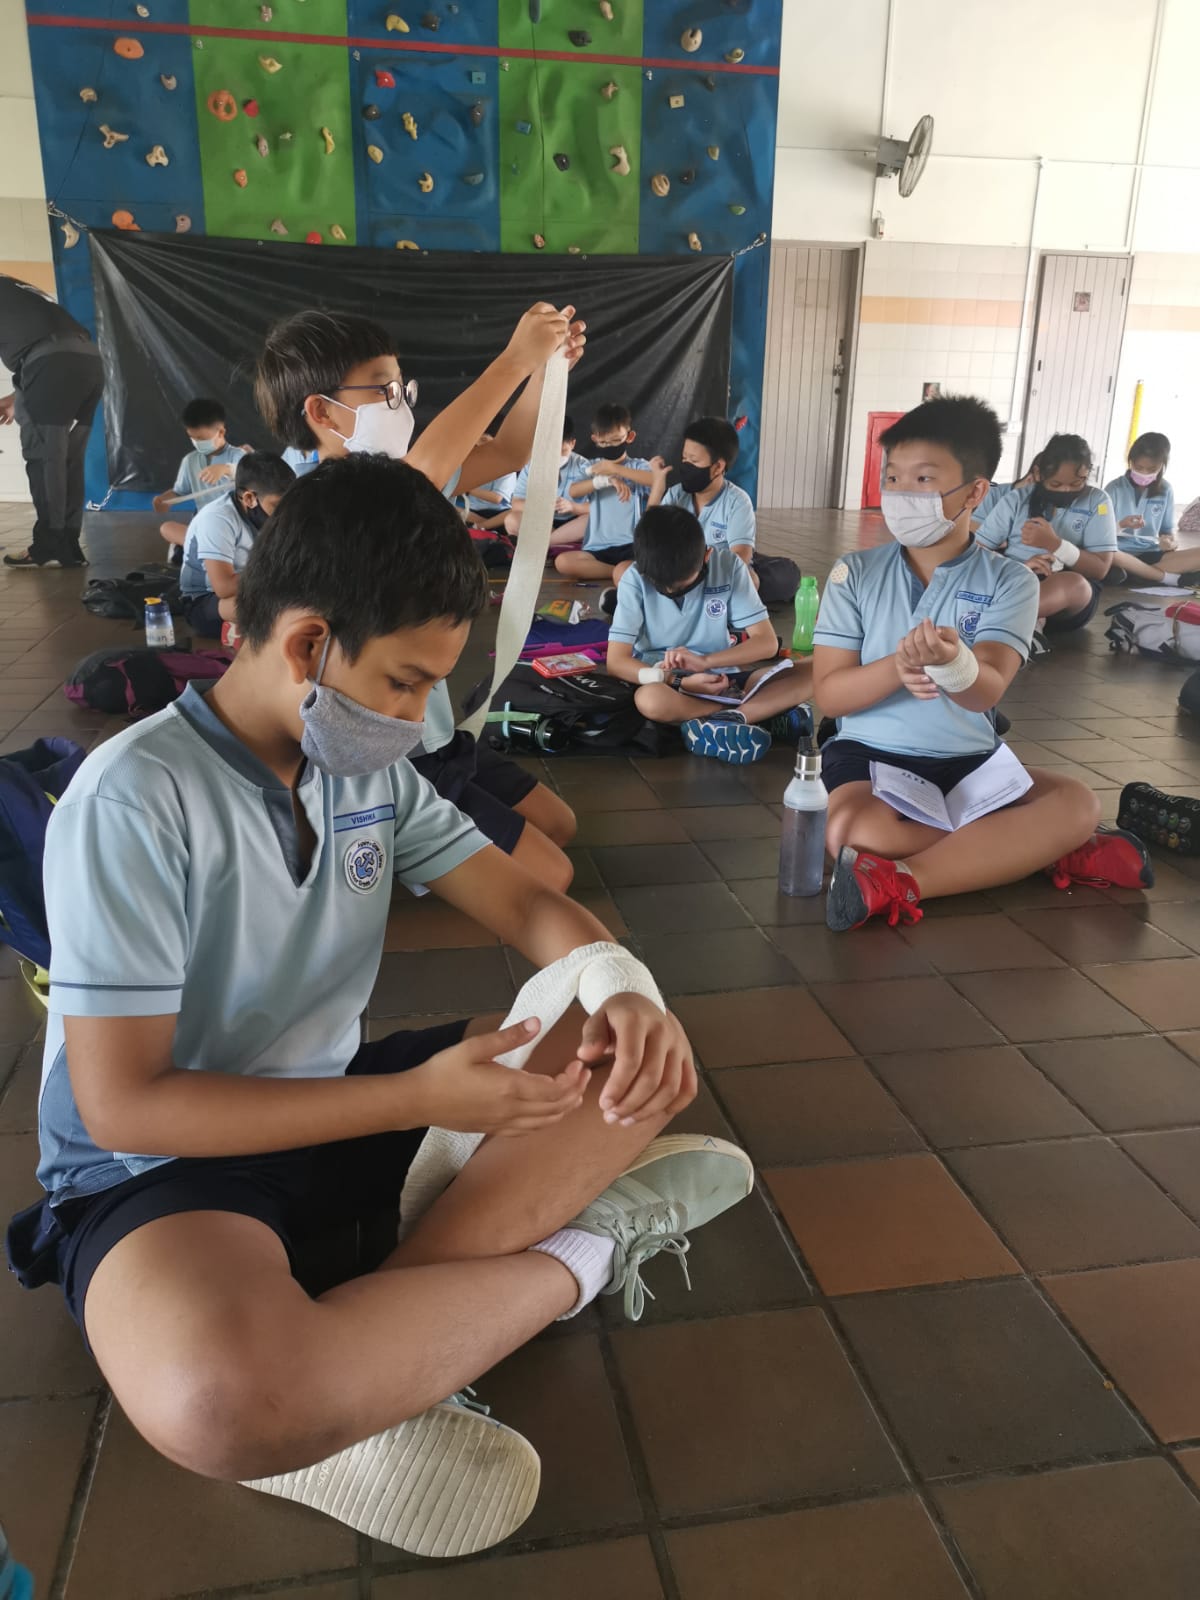 First Aid Activity